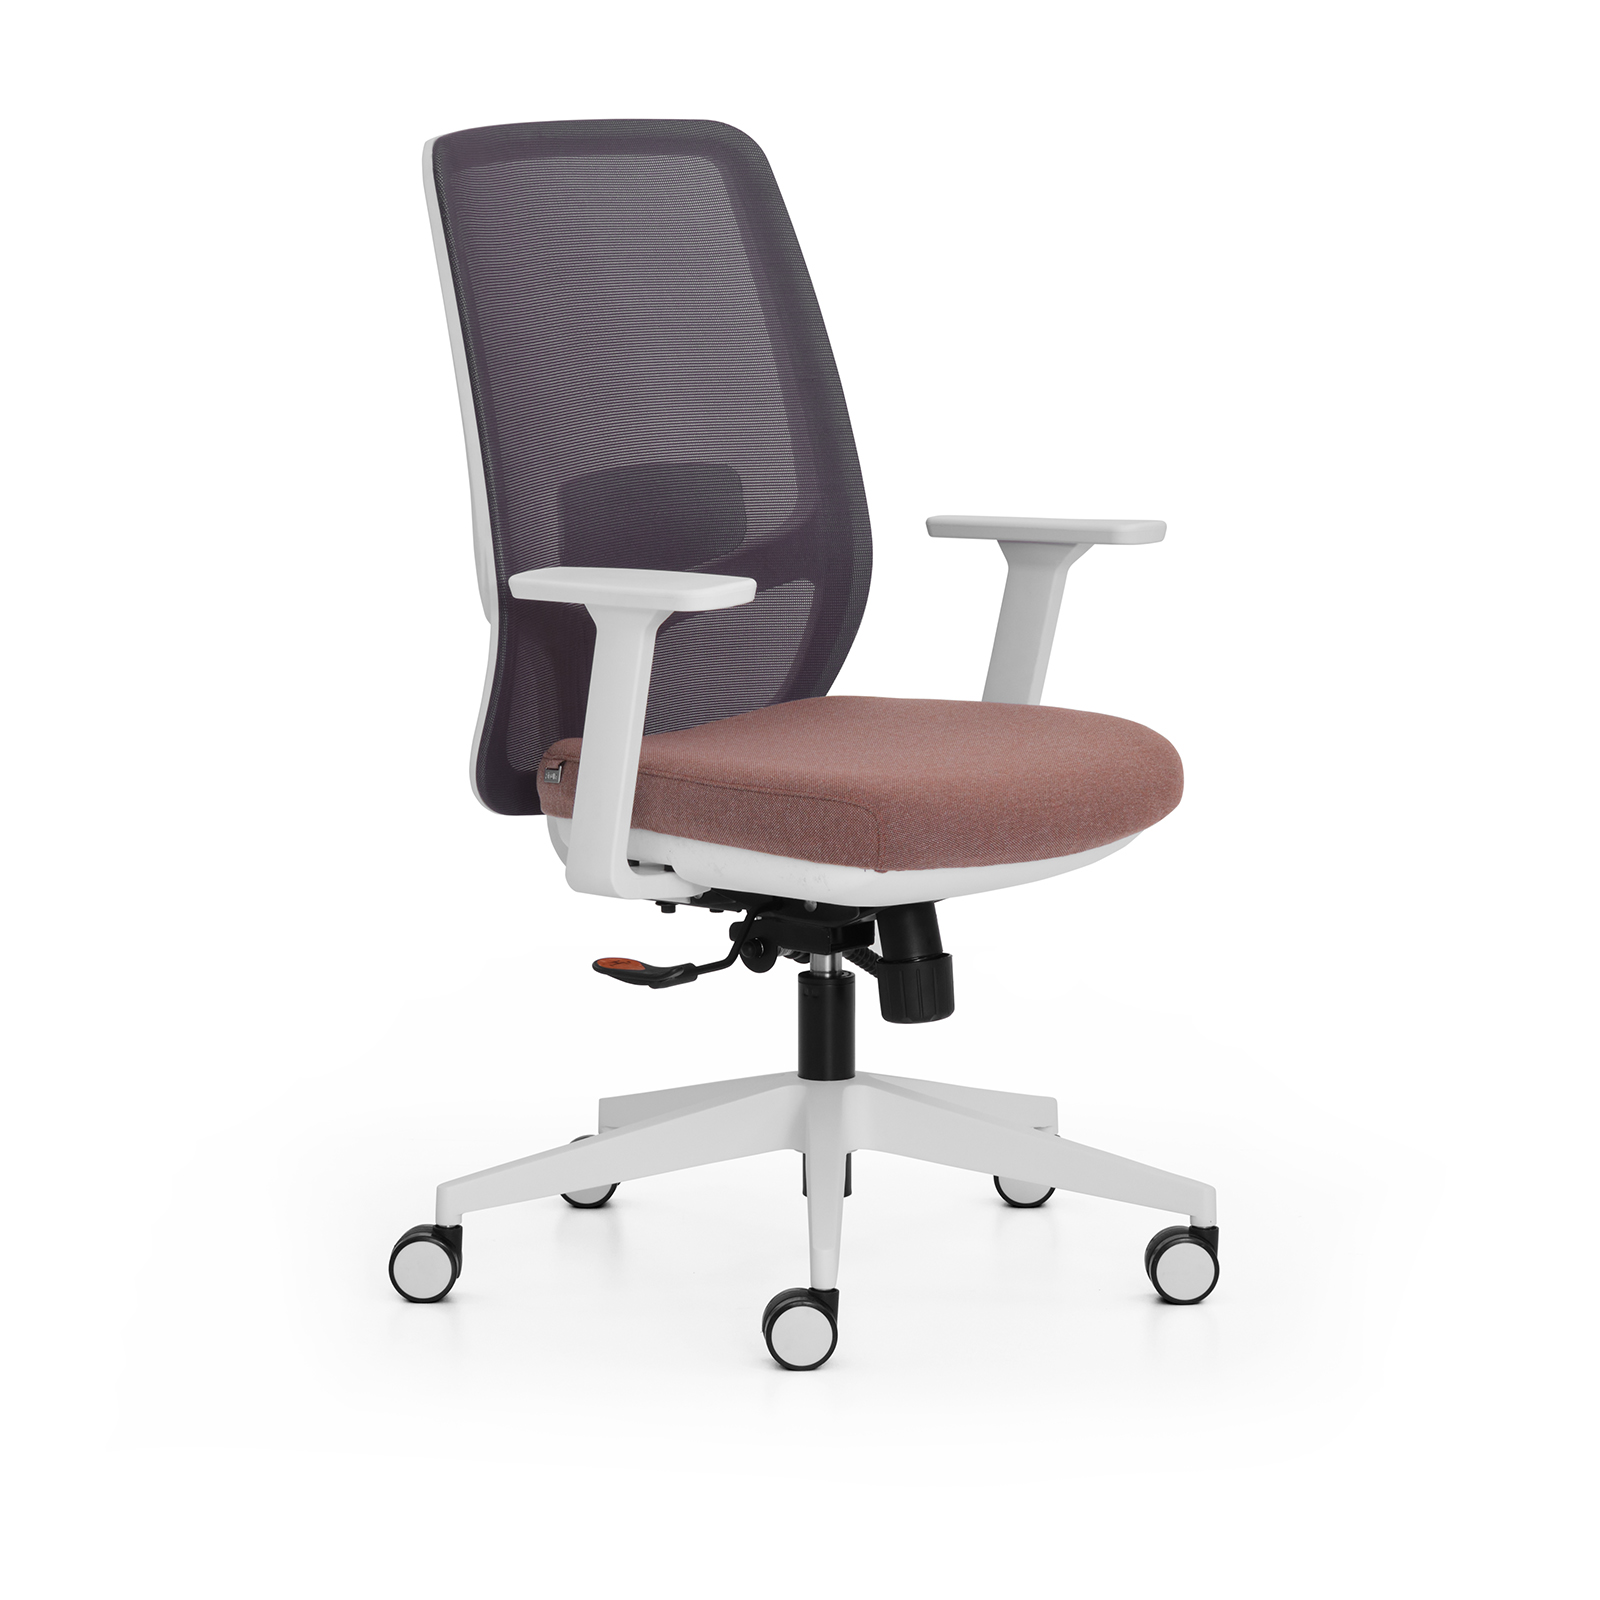 Tami White Office Chair 2